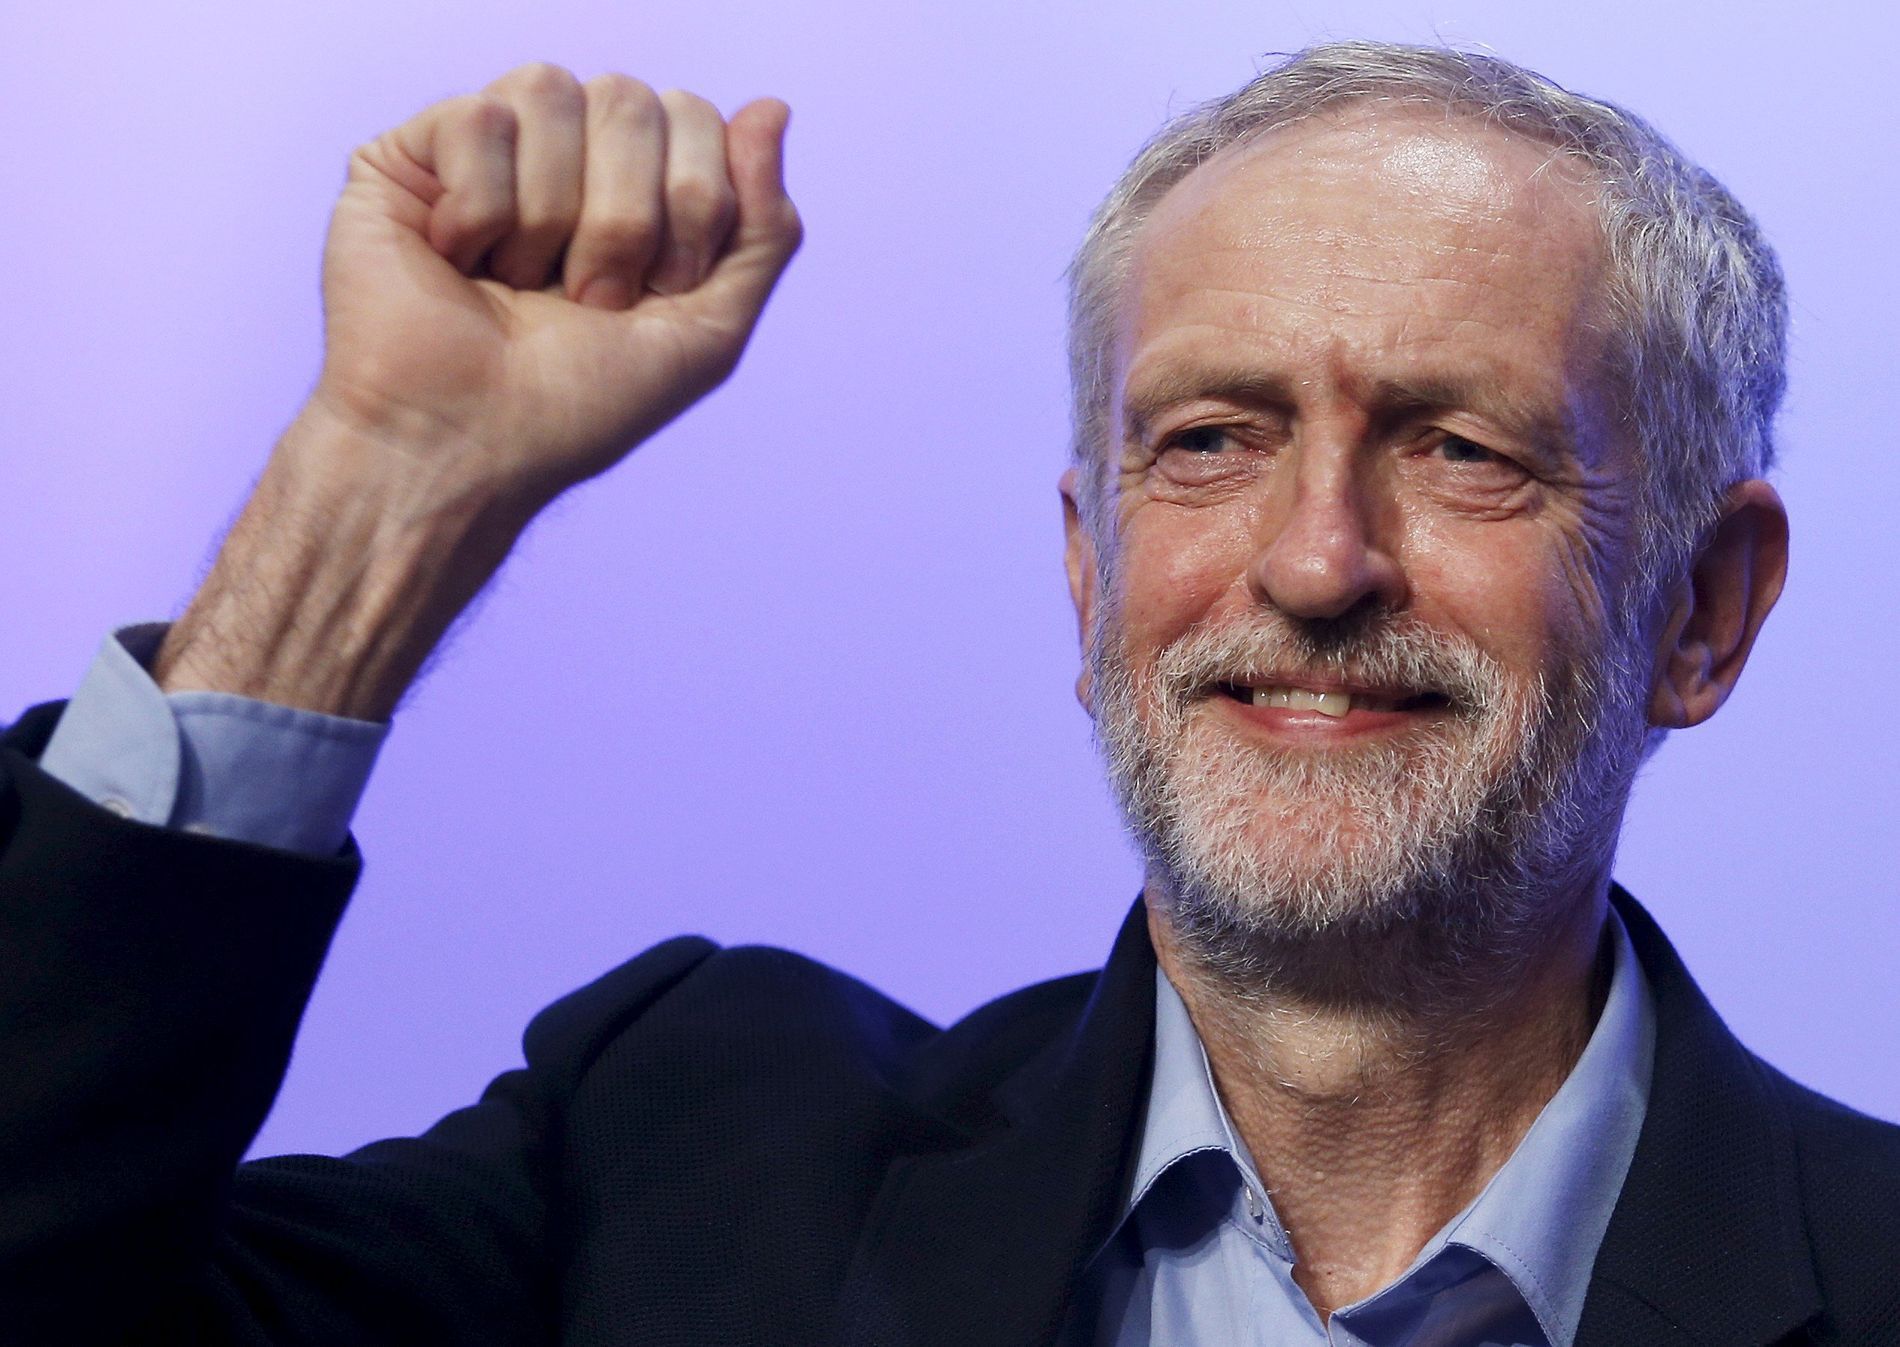 Jeremy Corbyn File photo of the new leader of Britain's opposition Labour Party Corbyn acknowledging applause after addressing the Trade Union Congress (TUC) in Brighton in southern England